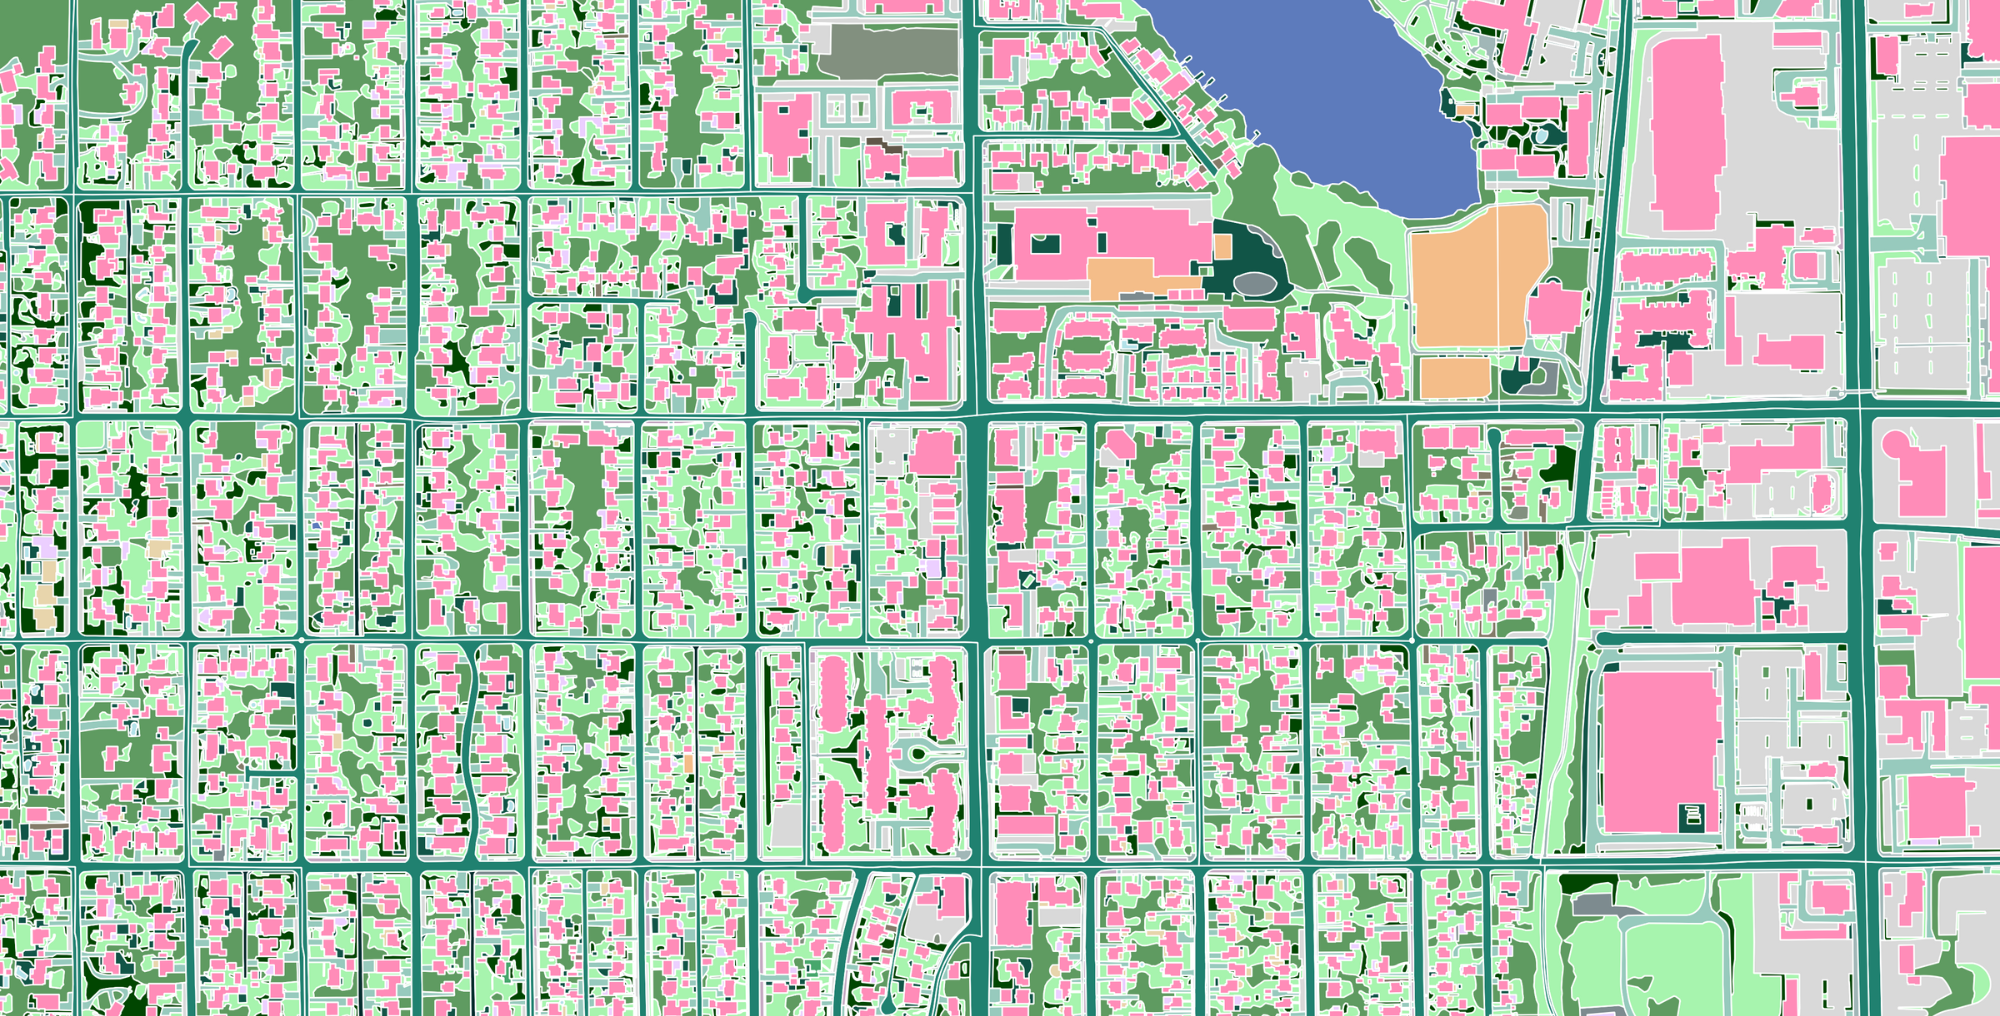 Land cover map in Seattle